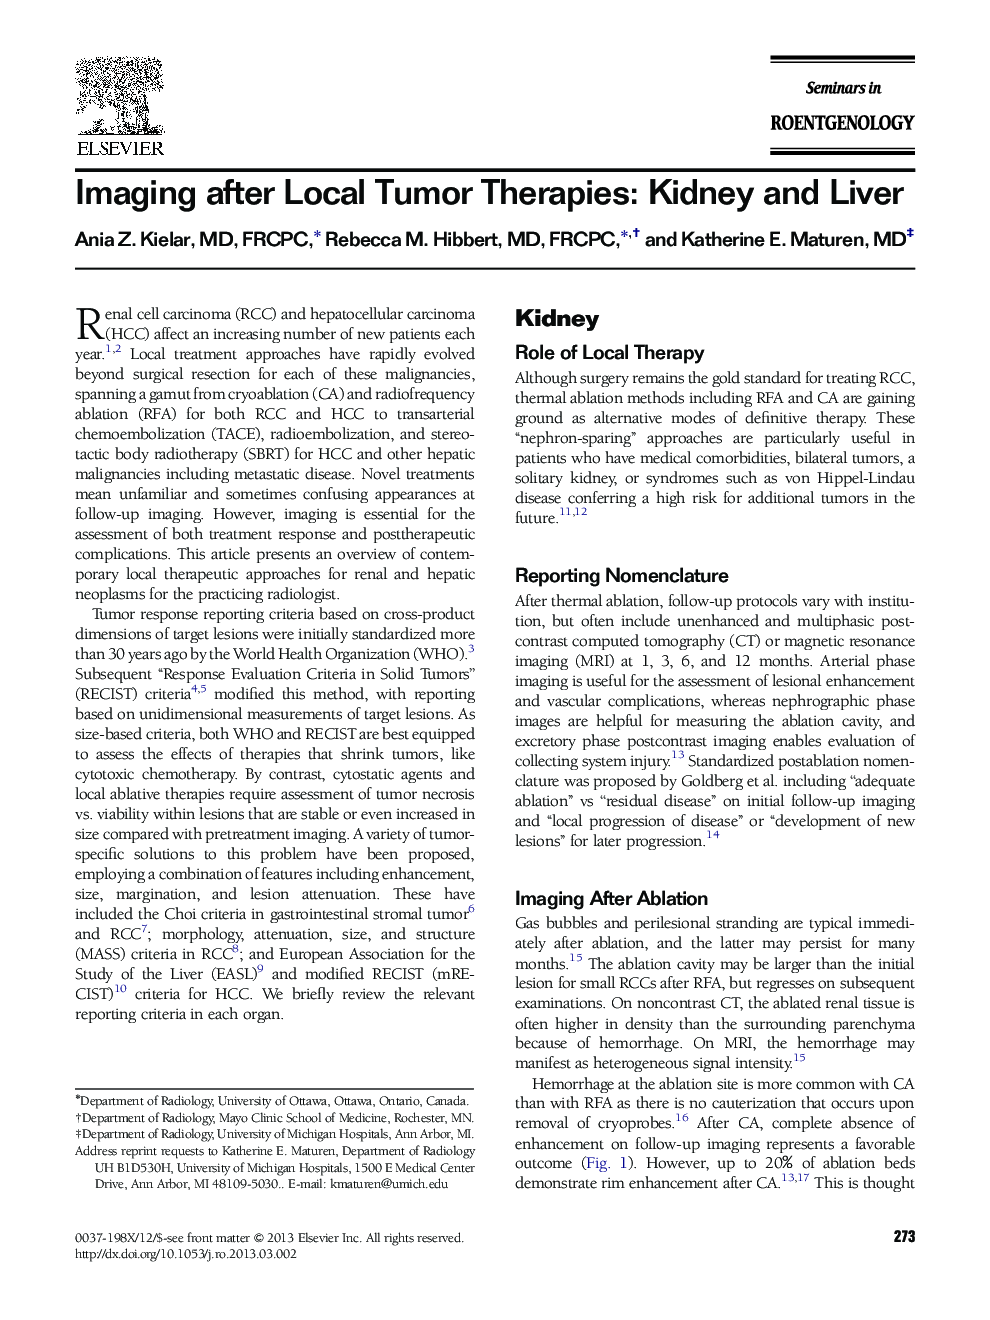 Imaging after Local Tumor Therapies: Kidney and Liver